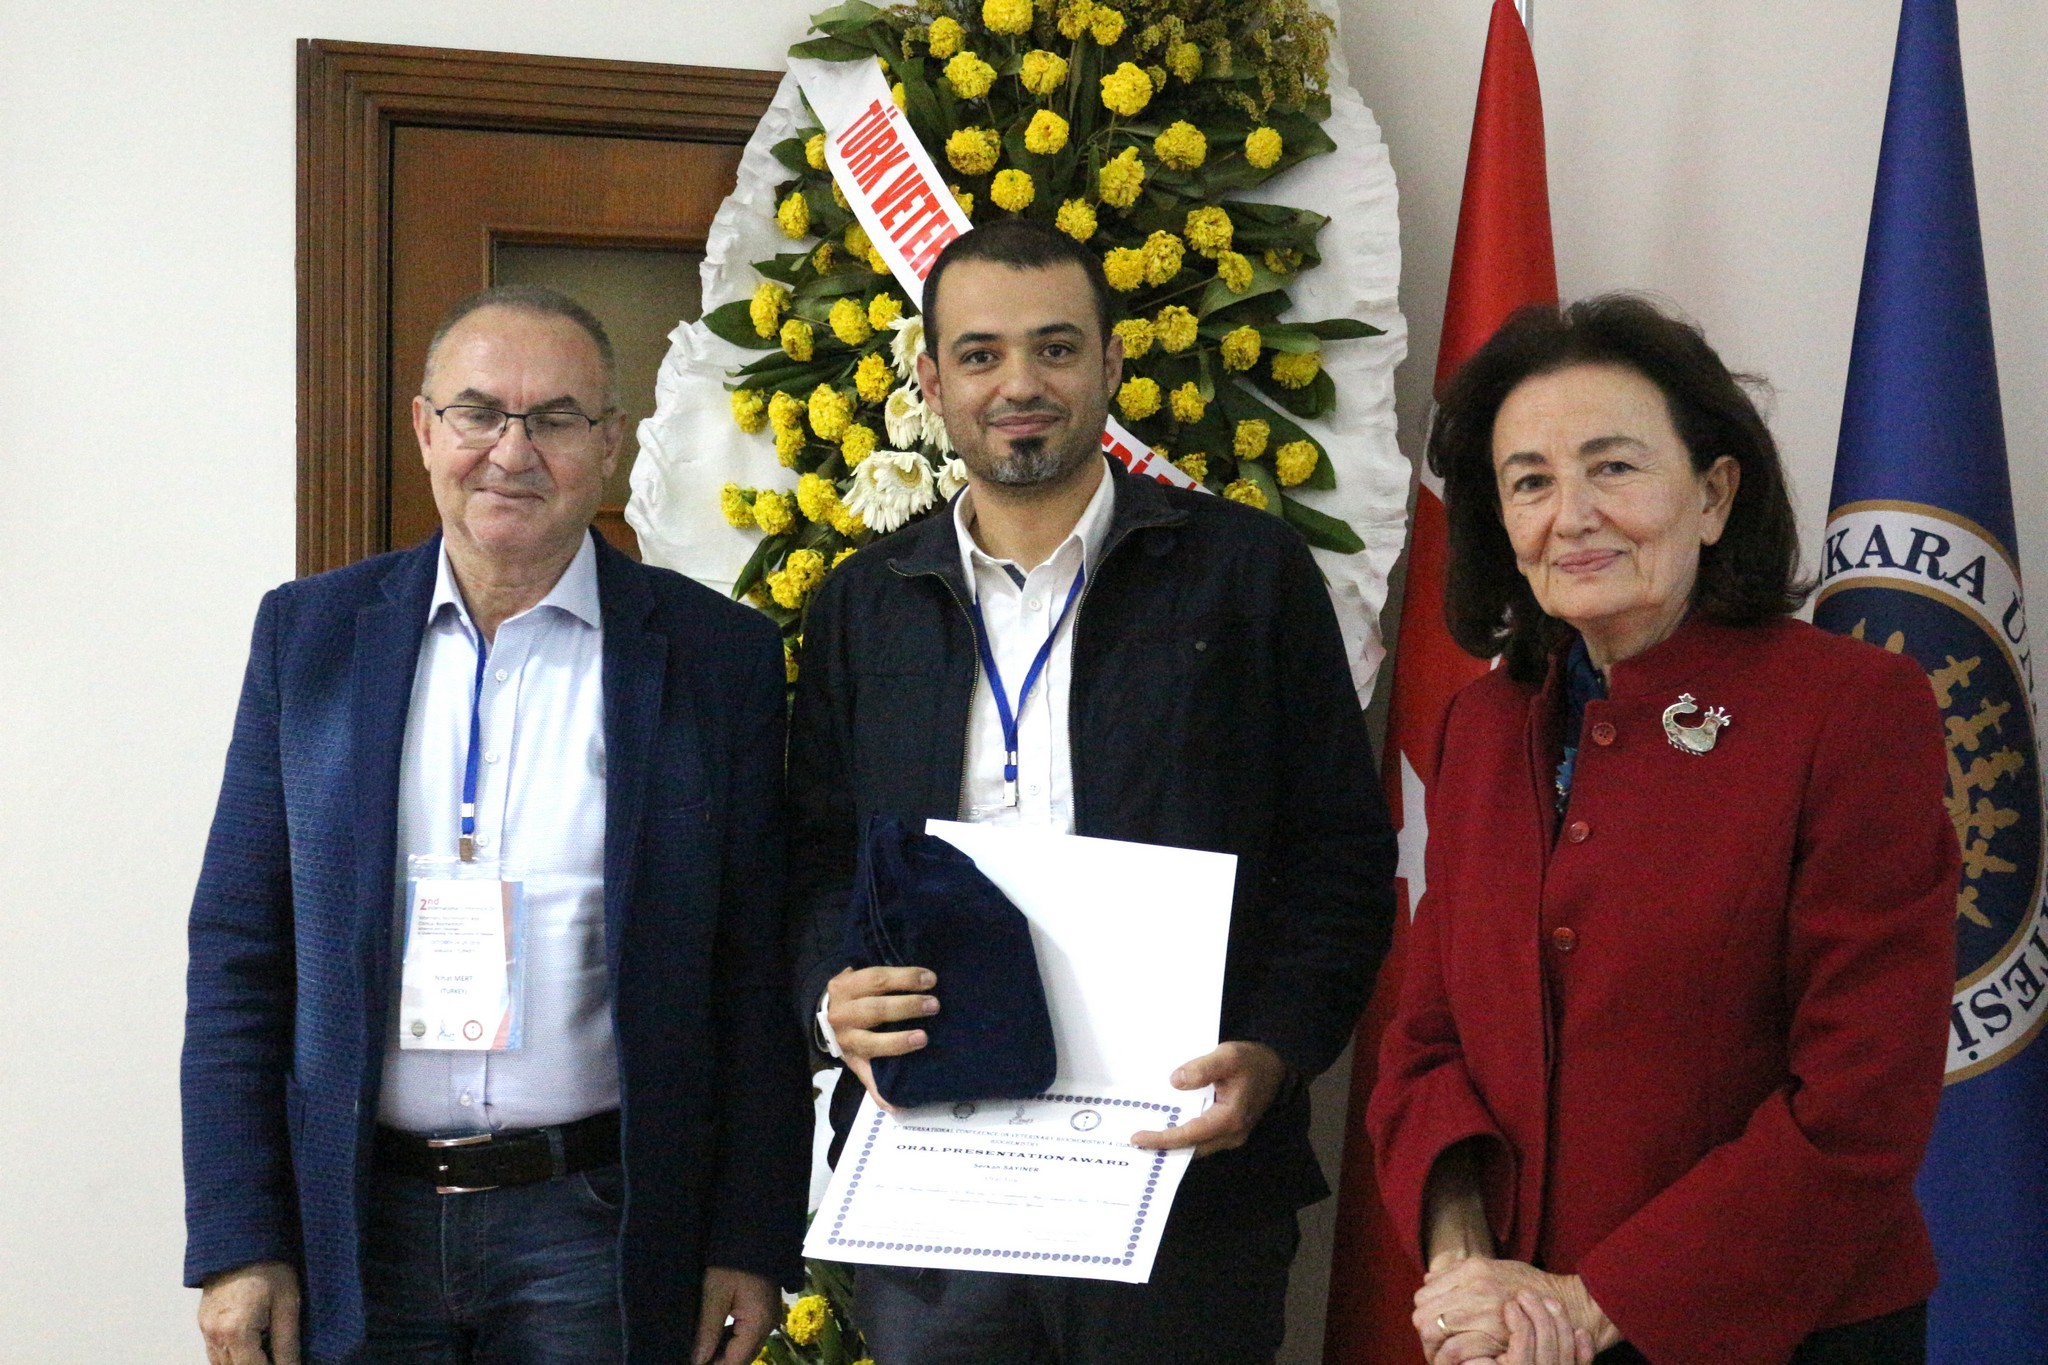 Having been conducted by the Faculty Members of the Faculty of Veterinary Medicine of Near East University, the Studies on the Use of Sunflower Oil in Deep-Frying Processes were deemed worthy for the First Prize Award